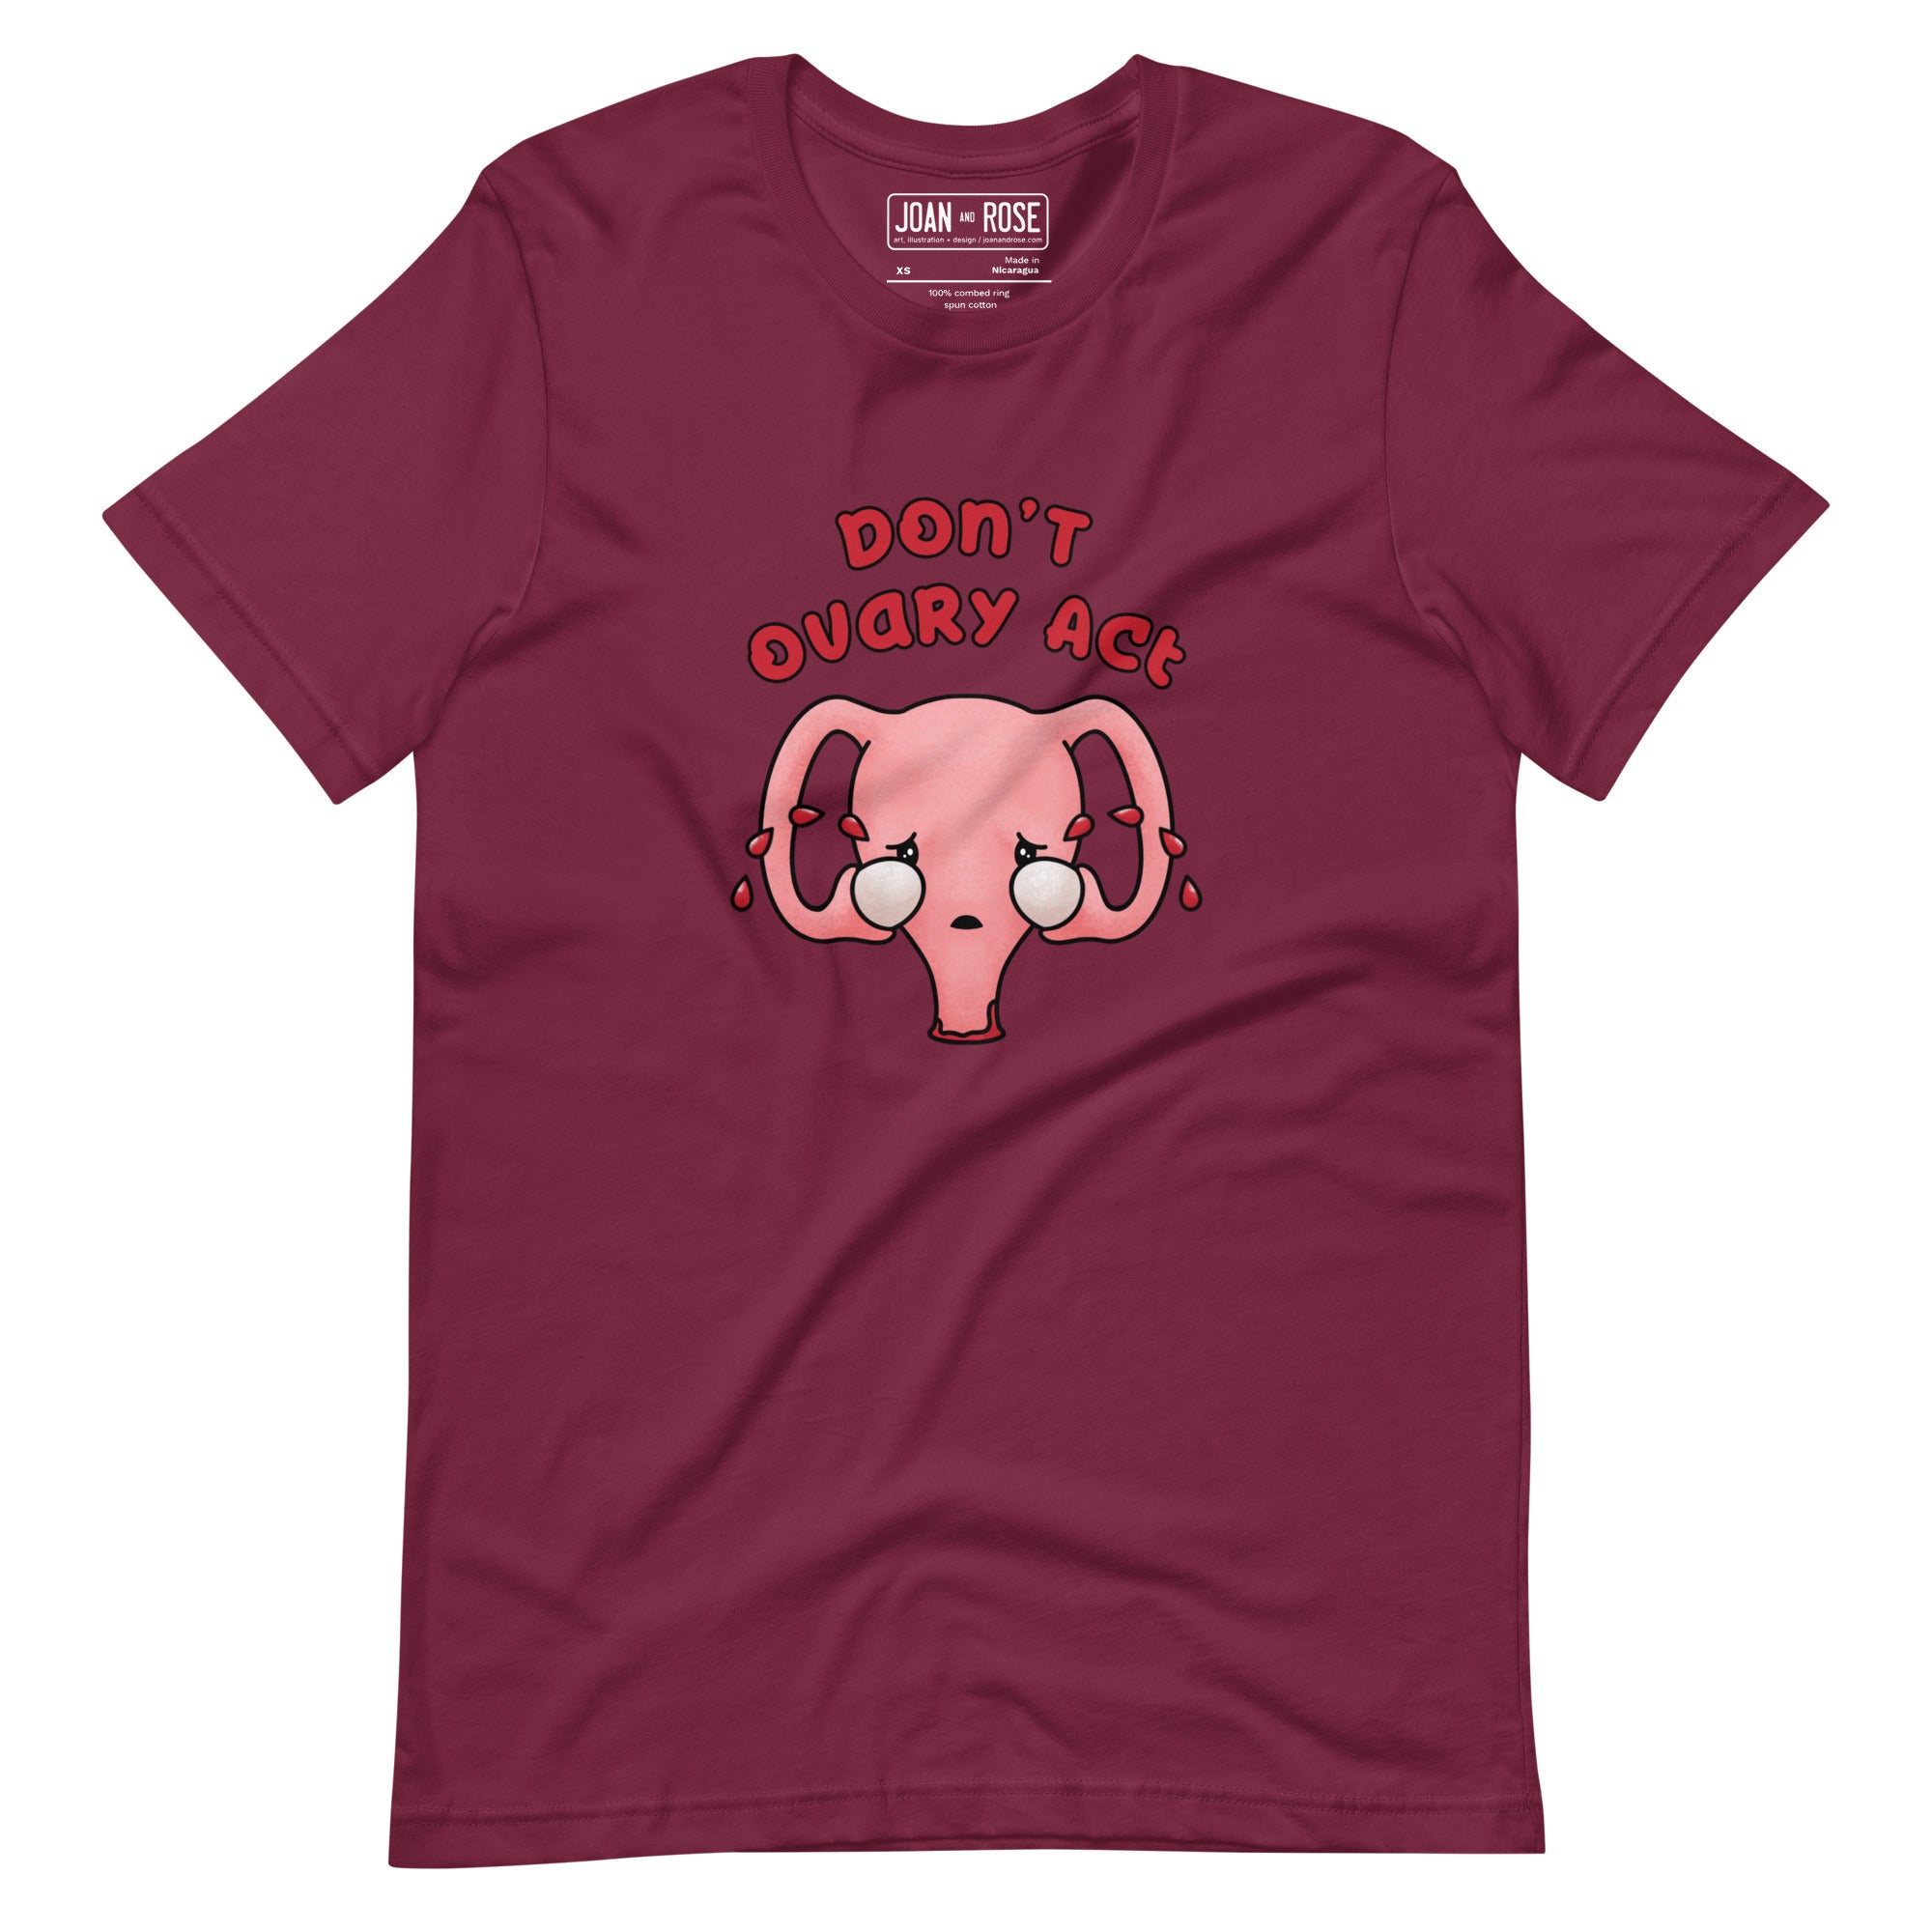 Maroon version of Don't Ovary Act t-shirt